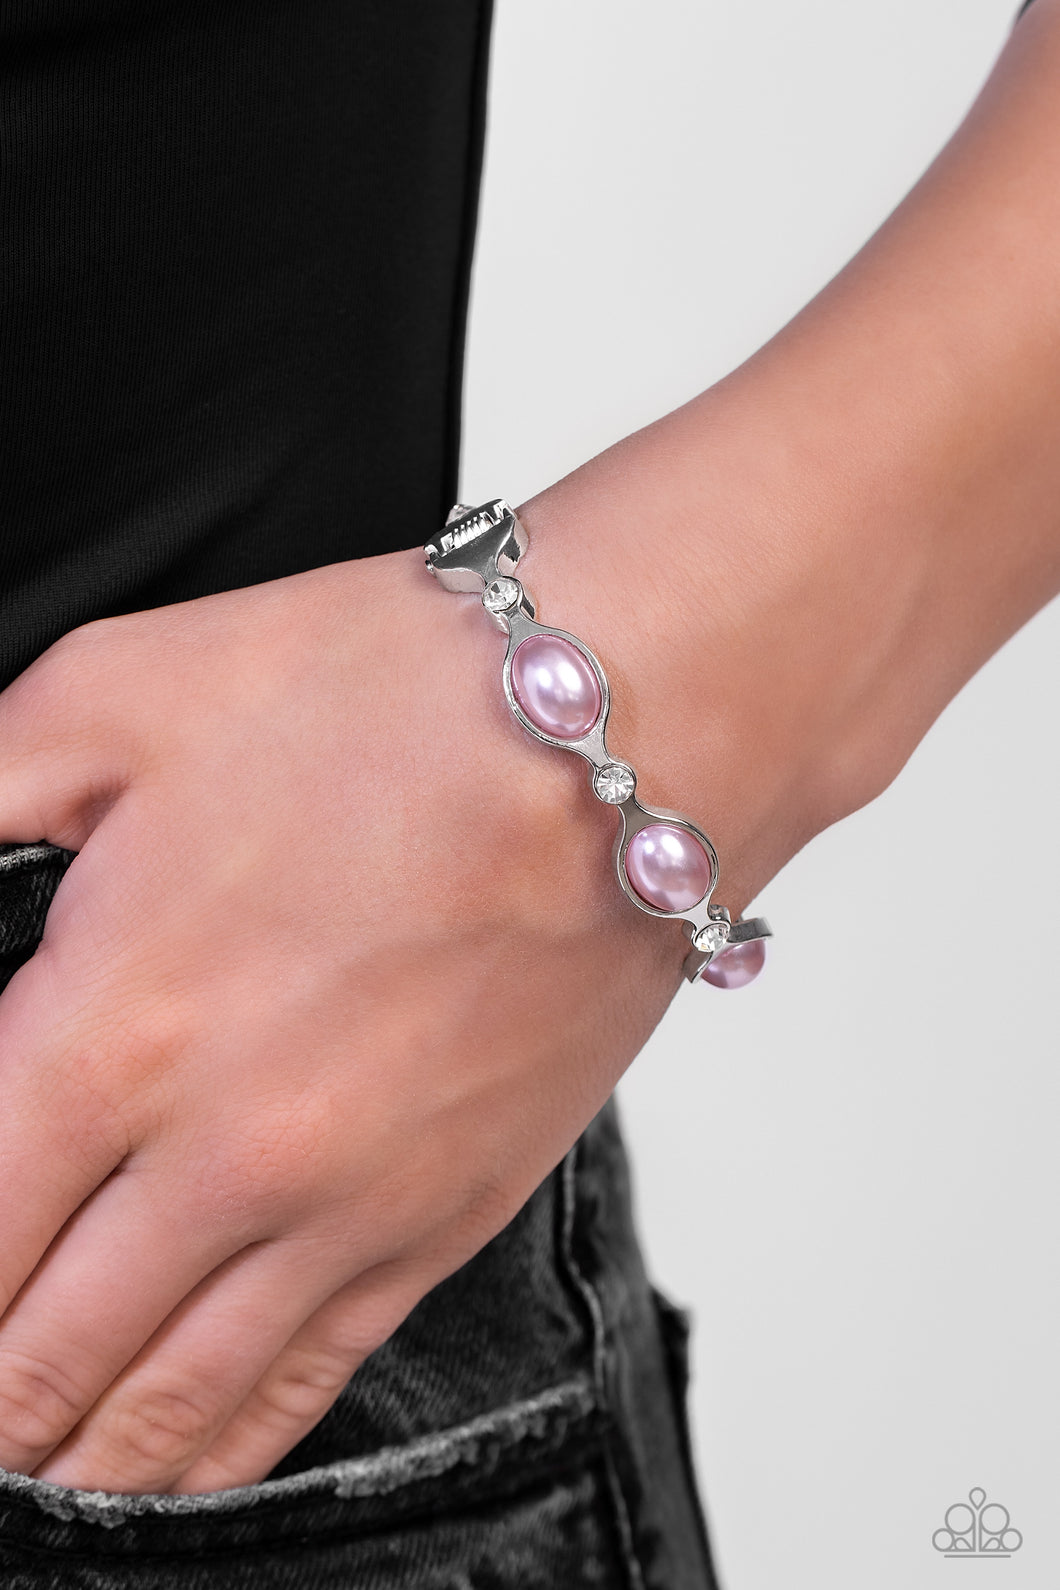 Paparazzi “Are You Gonna Be“ My PEARL  Pink Hinged Bracelet